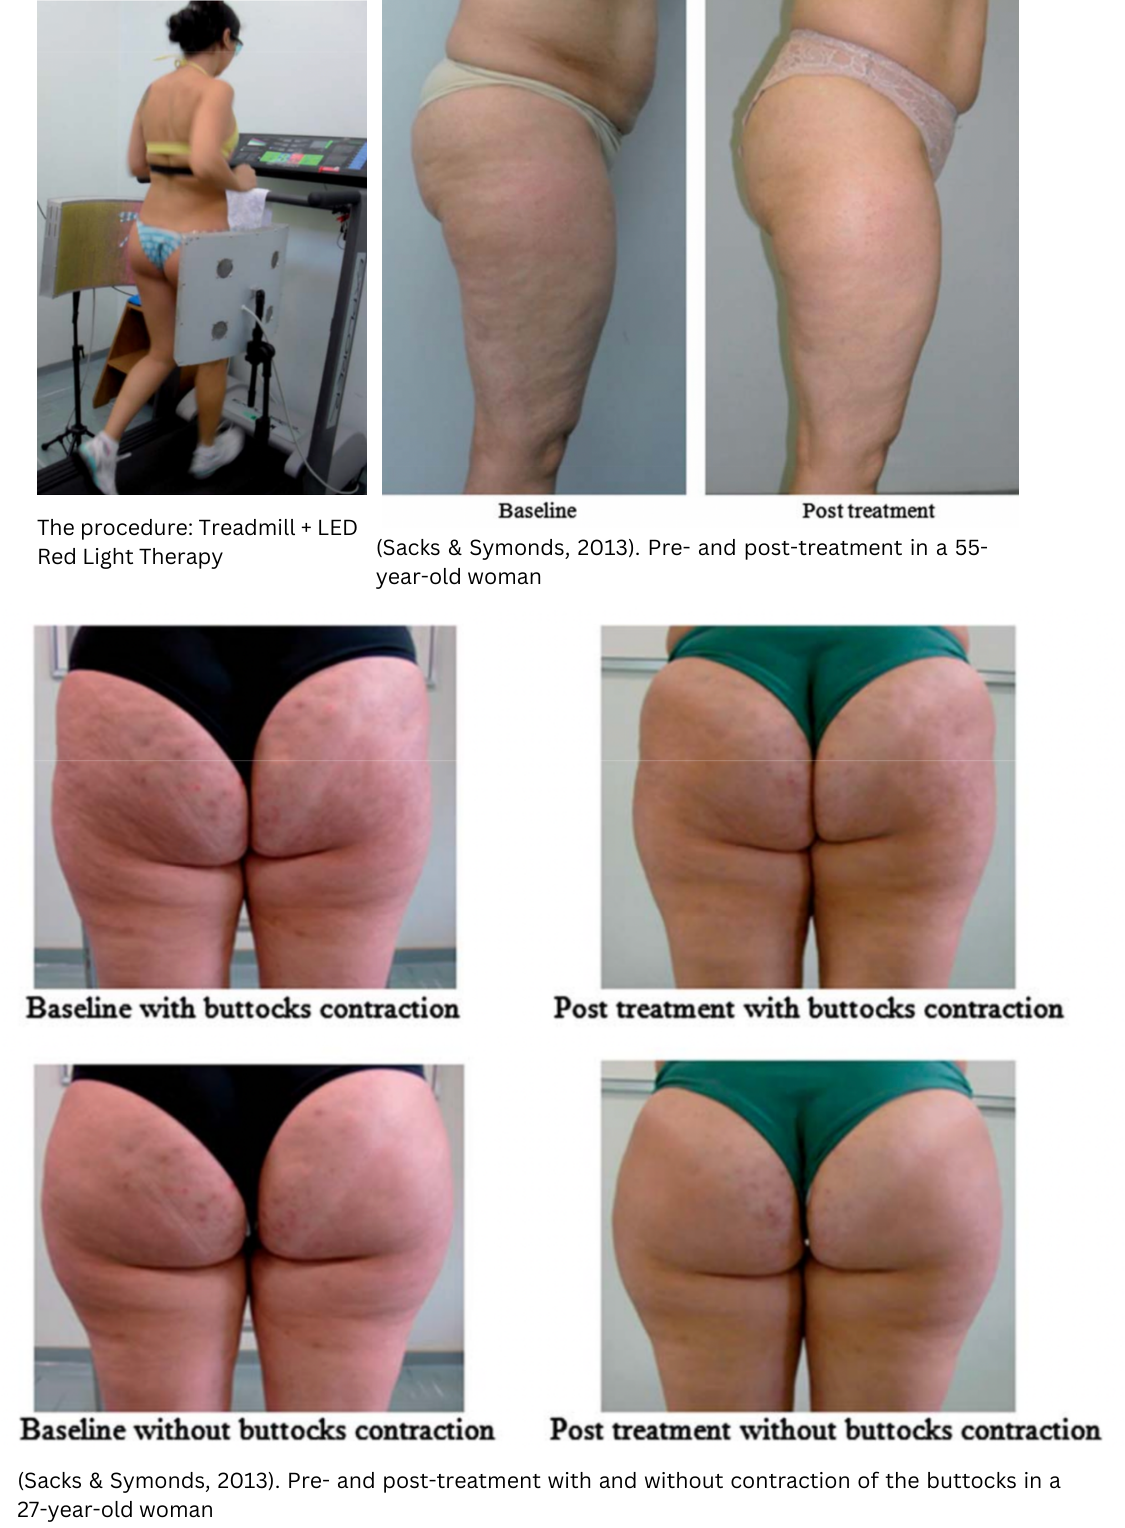 pre- and post-red light therapy treatment. Red light combined with treadmill training leads to reduction in cellulite.